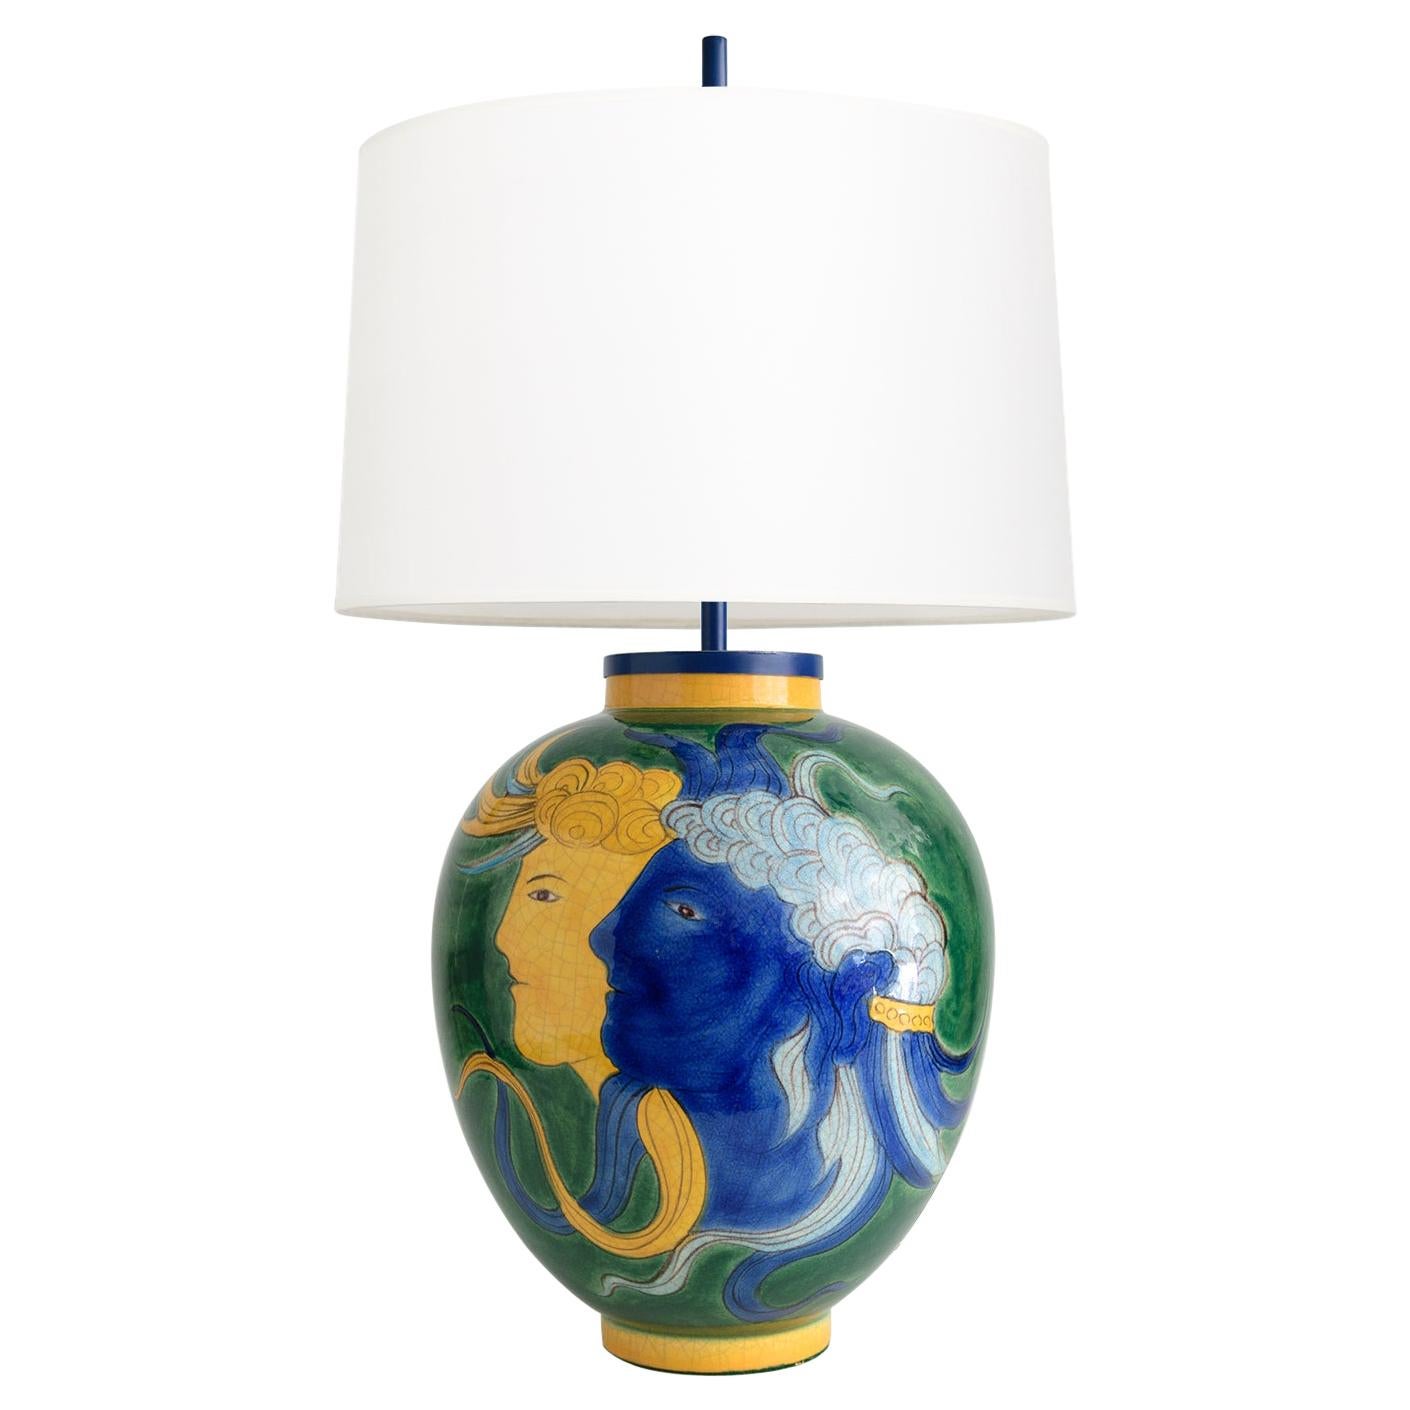 Louis Drimmer Ceramic Table Lamp with Blue & Yellow Faces on Green Body, France